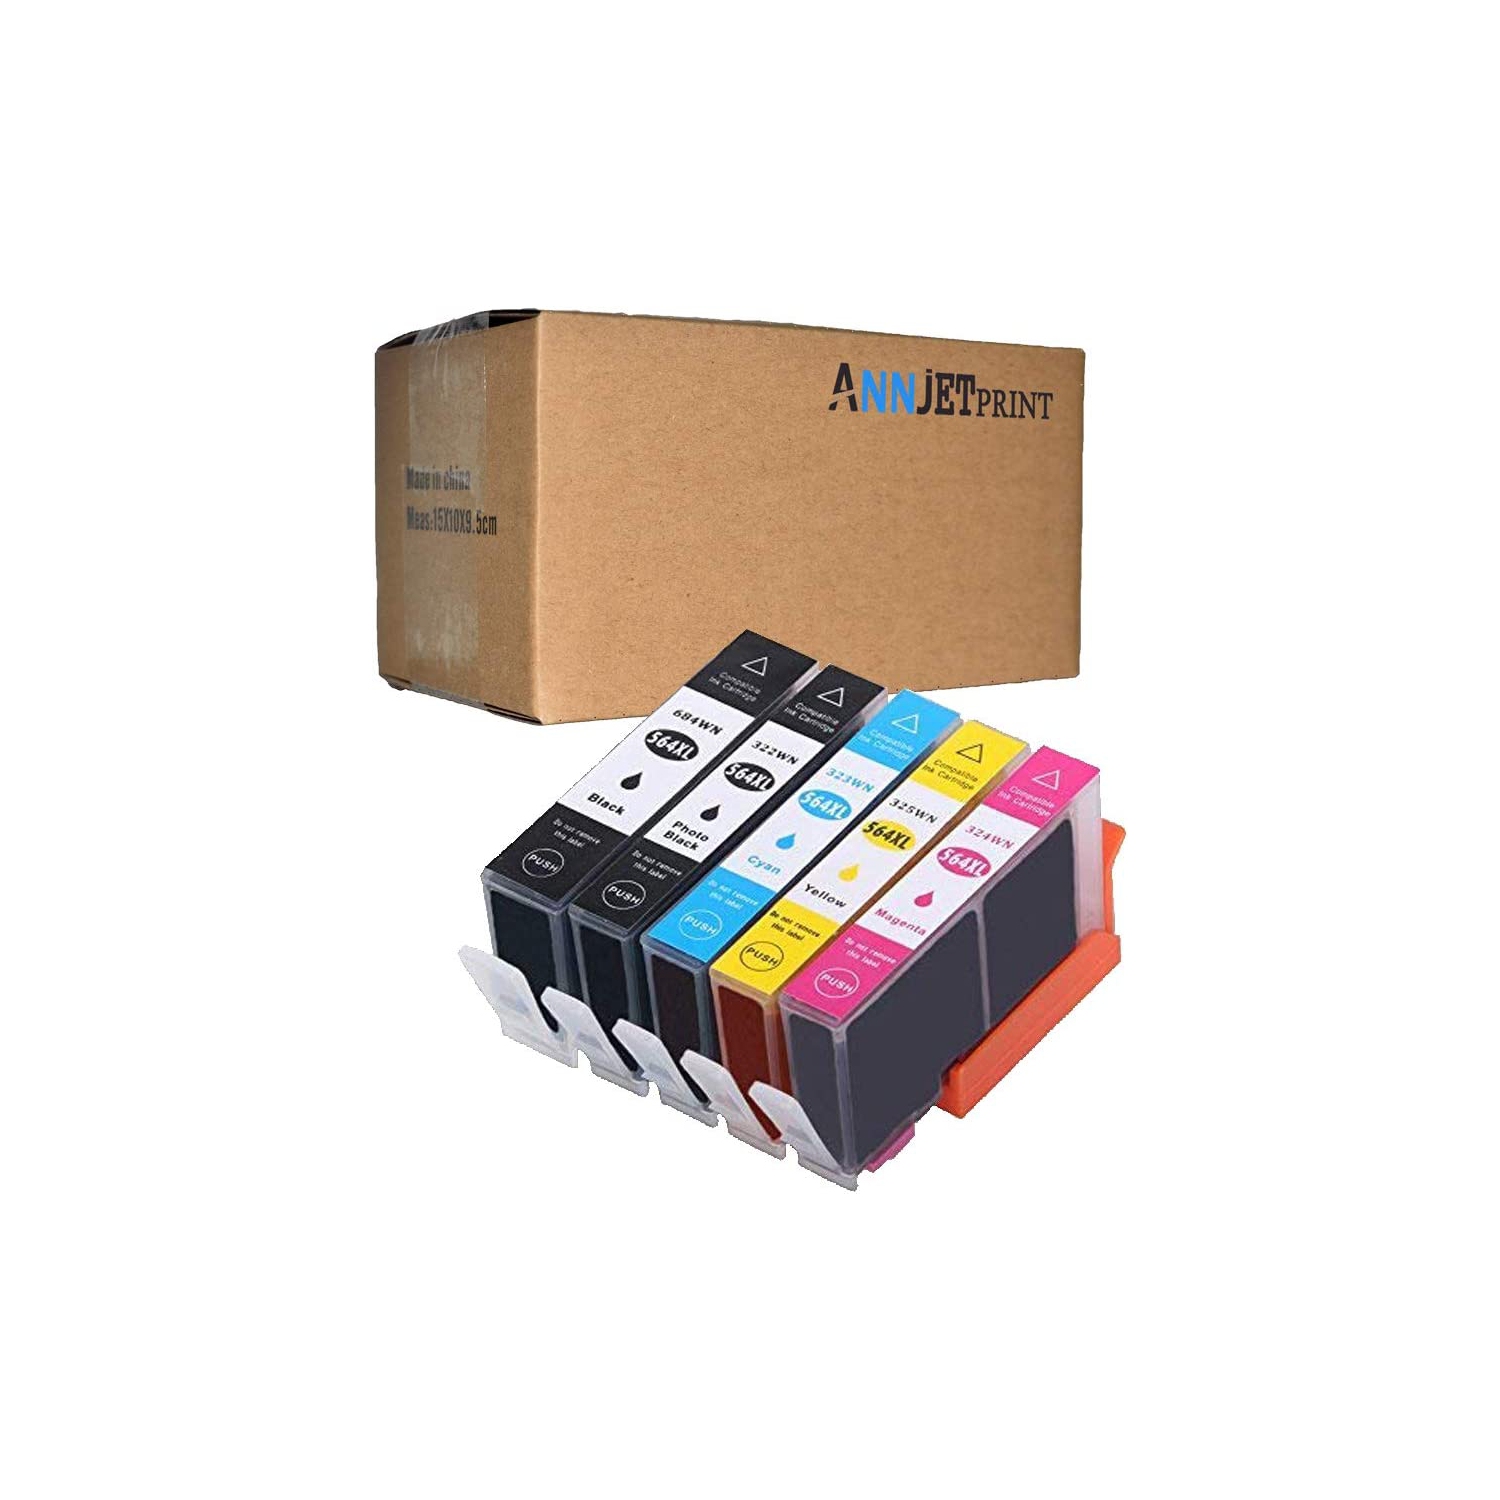 Compatible Ink Cartridge Replacement for HP 564XL 564 for HP Photosmart 5520 6520 7520 5510 6510 7510 7525 B8550